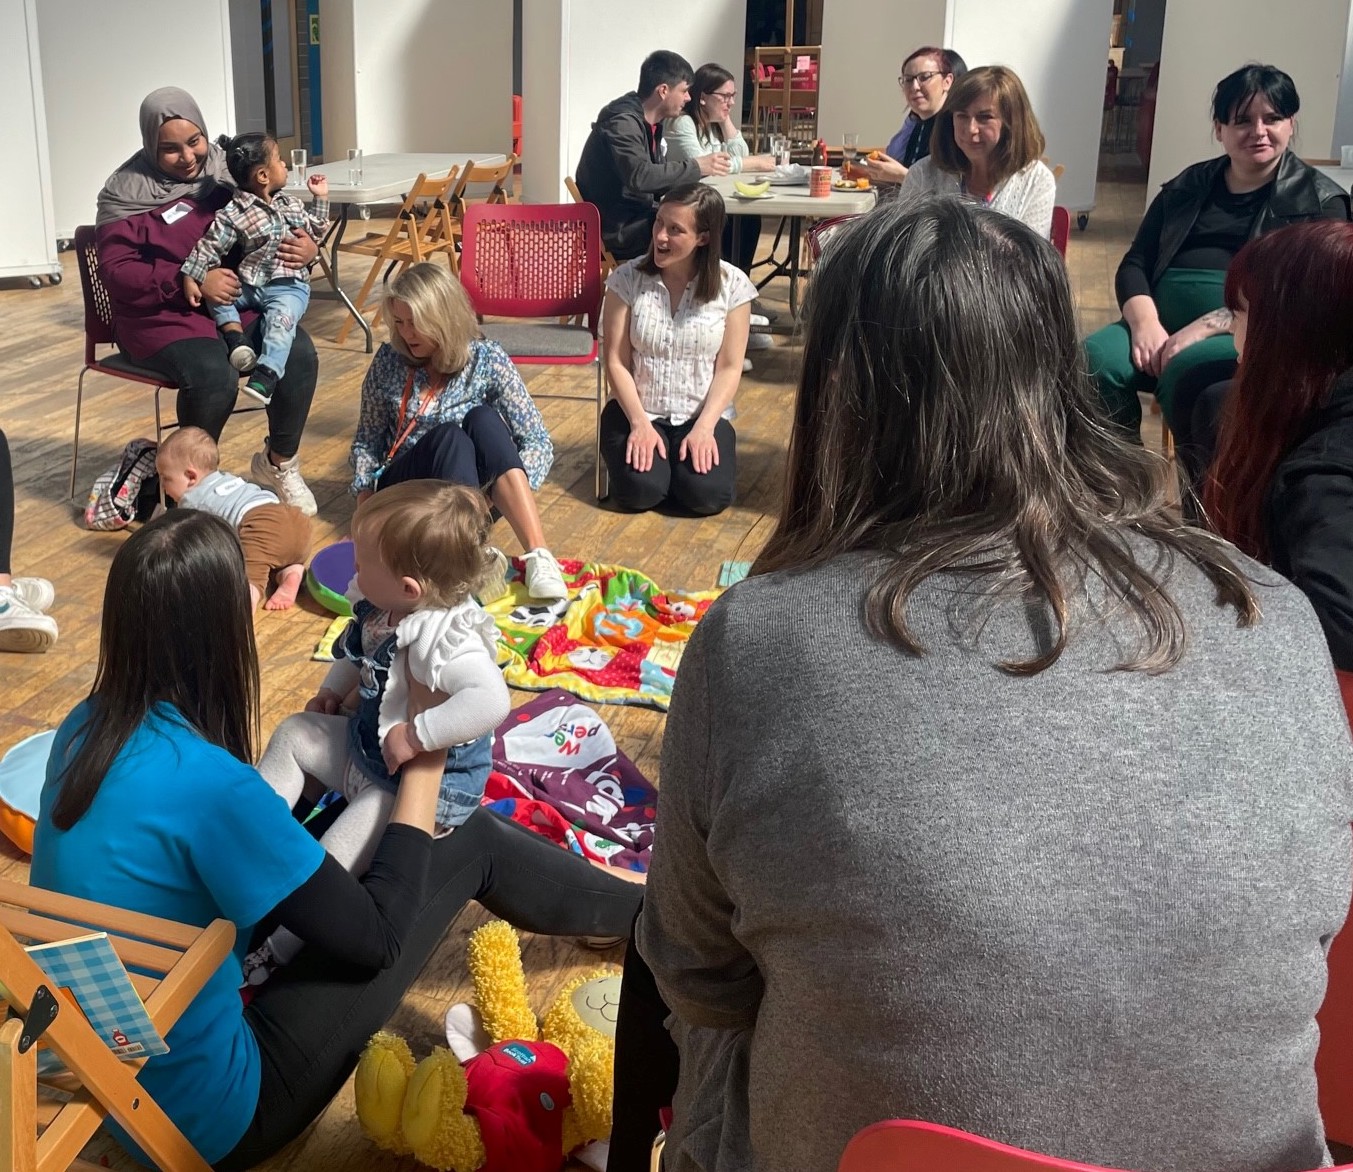 A photo of children and adults in a playgroup. They are sitting down on the floor and on chairs, talking to one another. There are toys and play things on the ground.